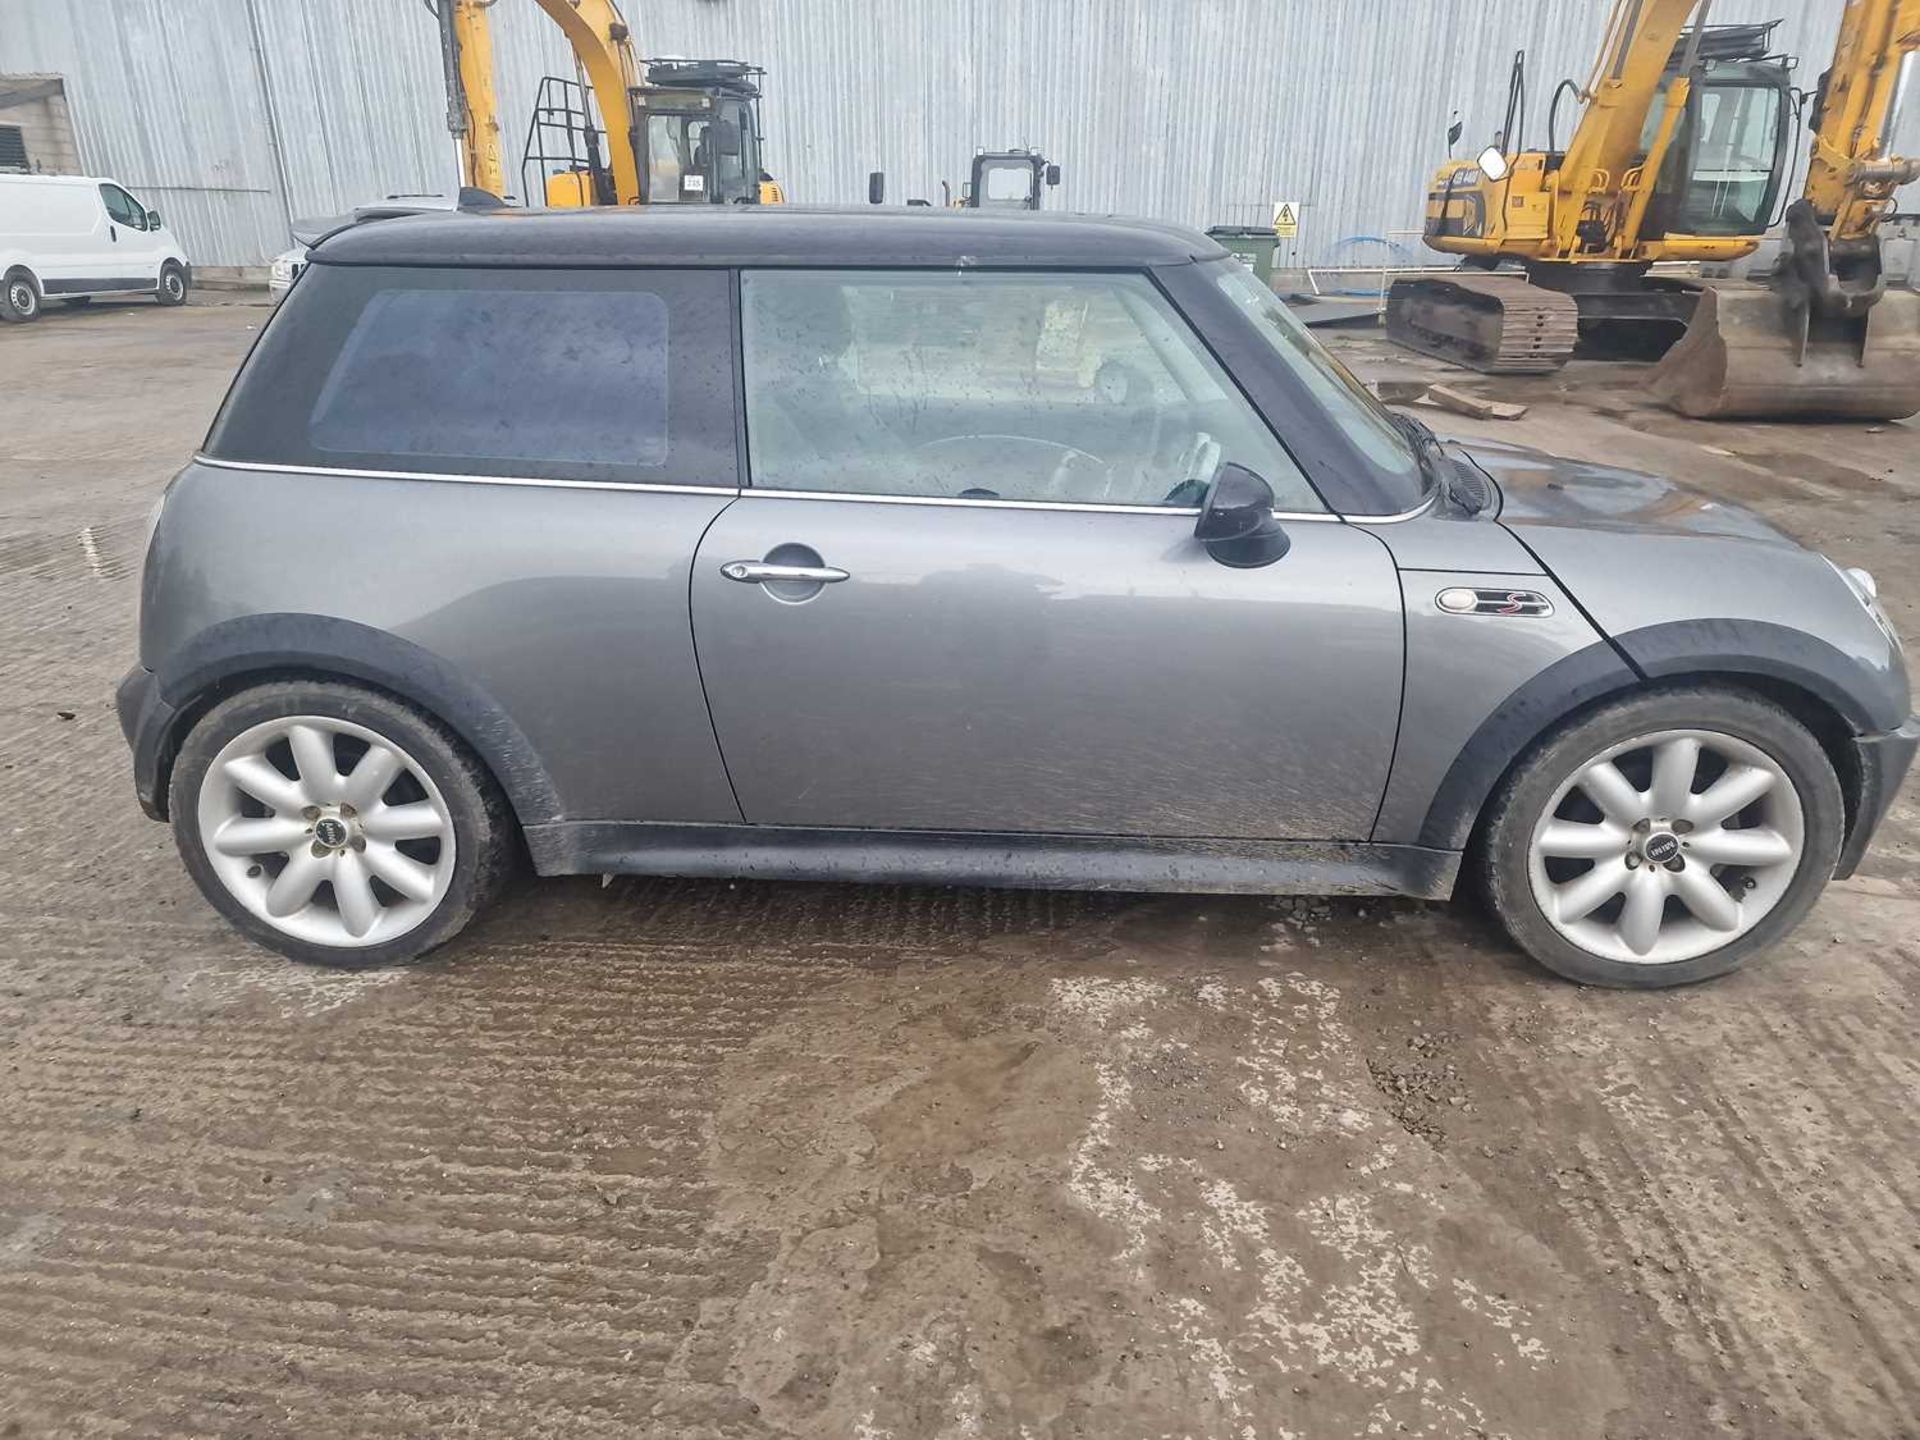 Mini Cooper S 6 Speed, Full Leather, Cruise Control, A/C, Double Sun Roof (Reg. Docs. Available) - Image 6 of 24